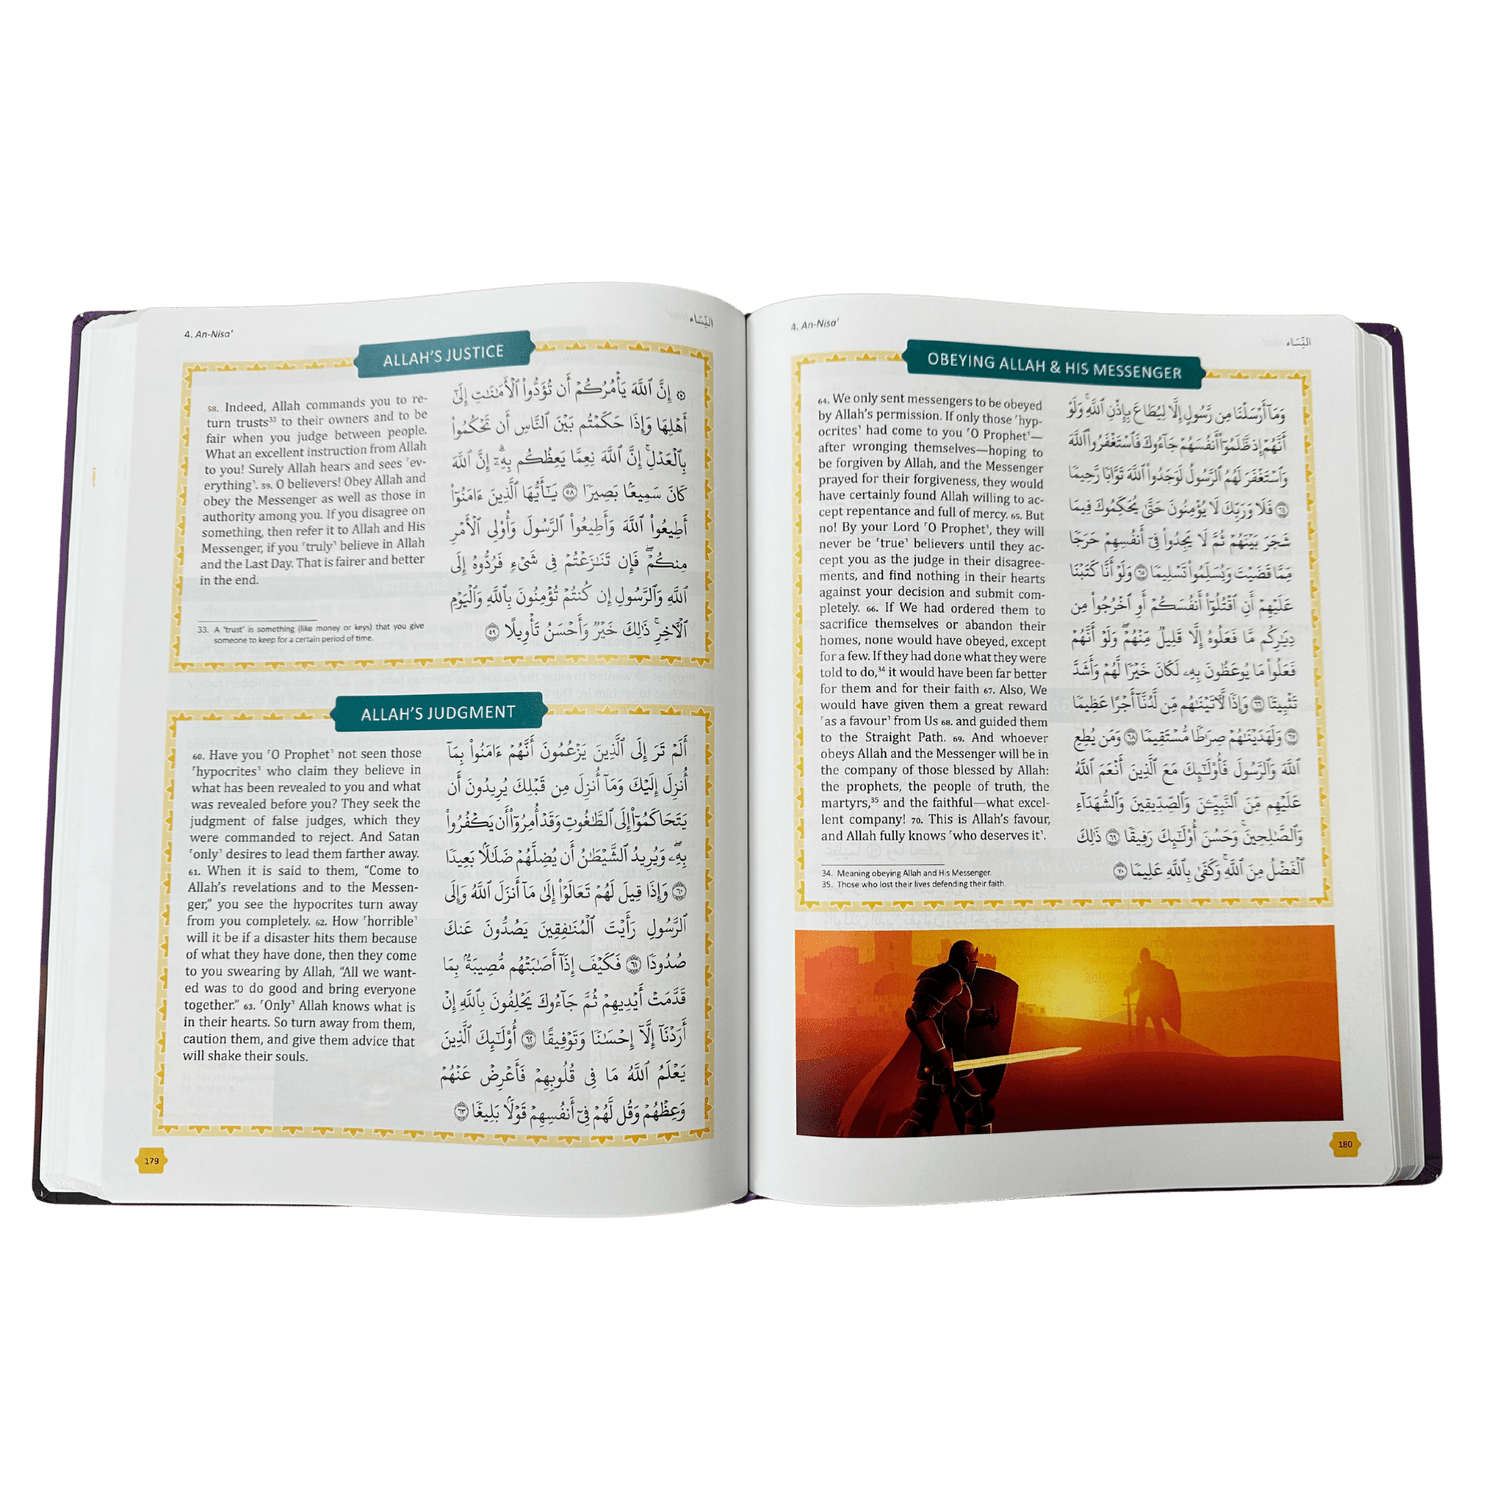 The Clear Quran Tafsir for Kids ( Surahs 1-9 ) with Arabic Text Hardcover